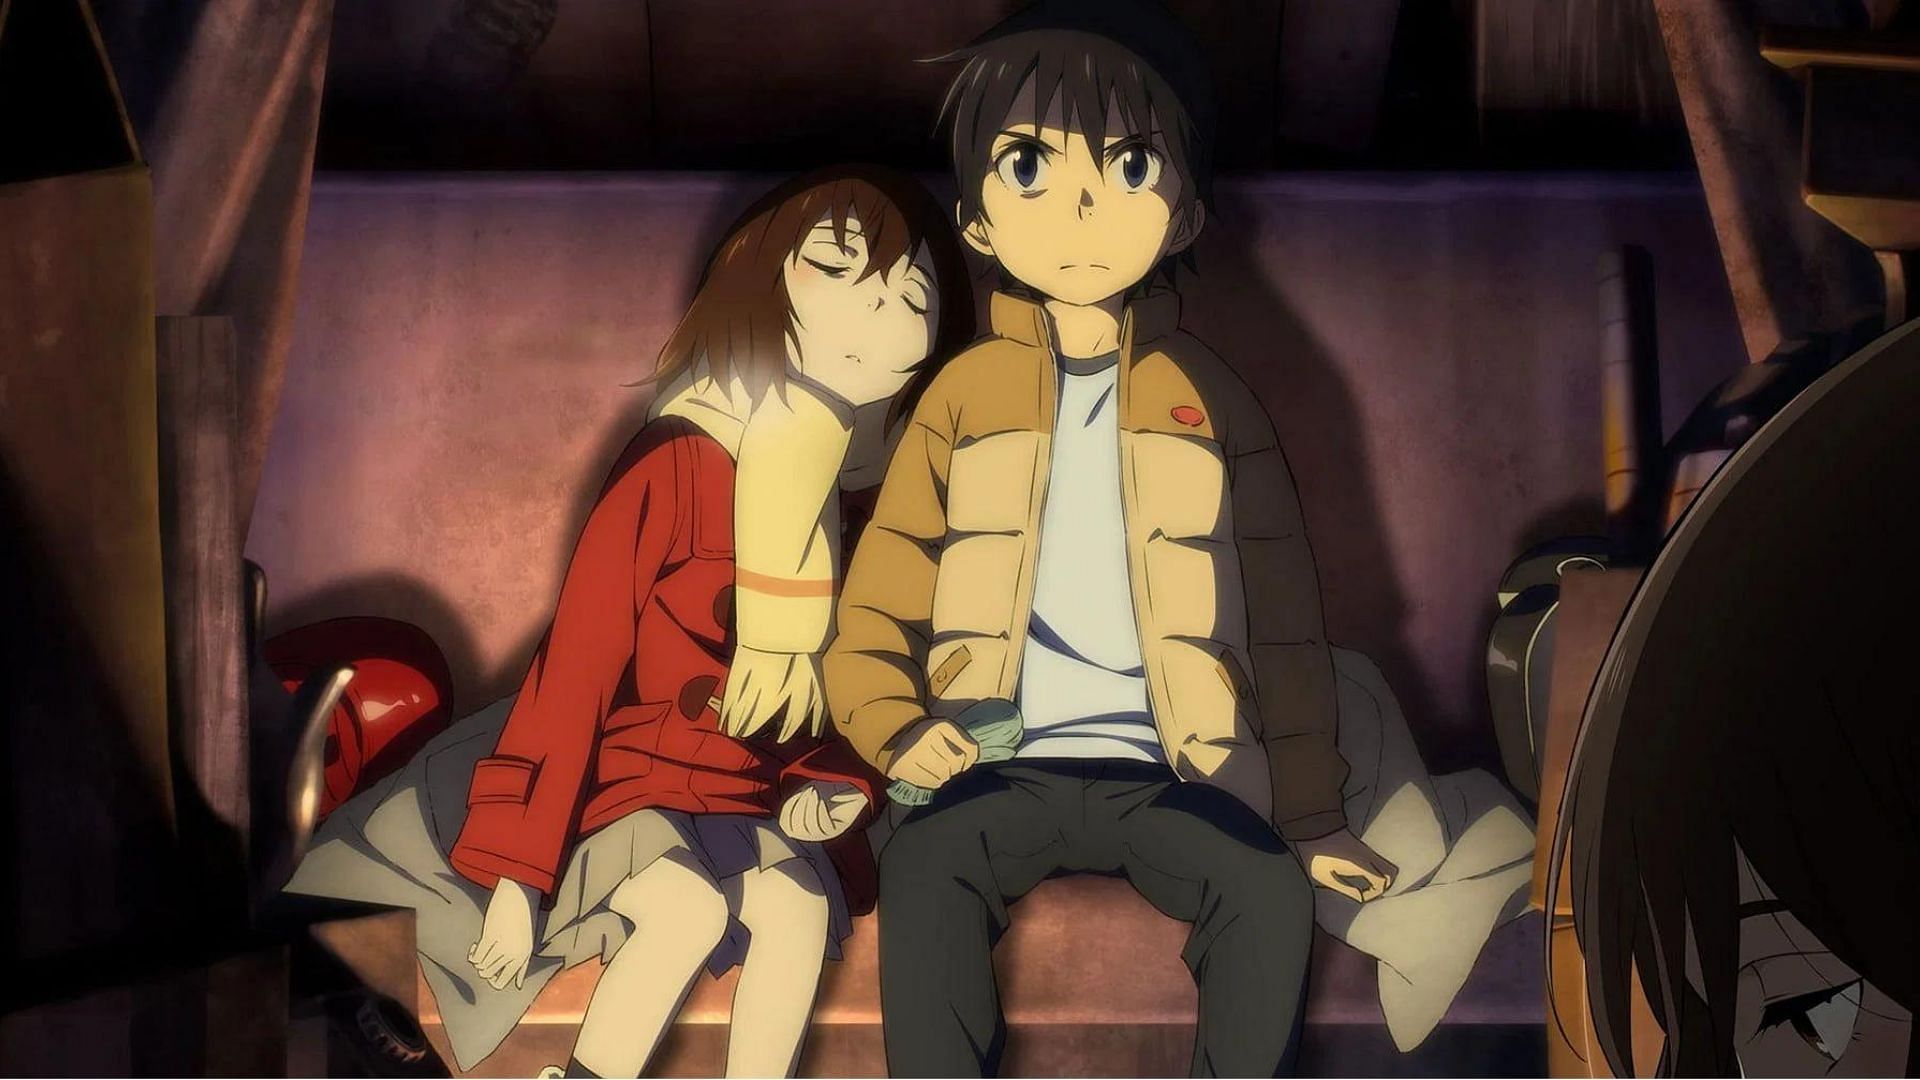 The Ending Was Disappointing😞😞 - Erased Anime - NANI?! Anime